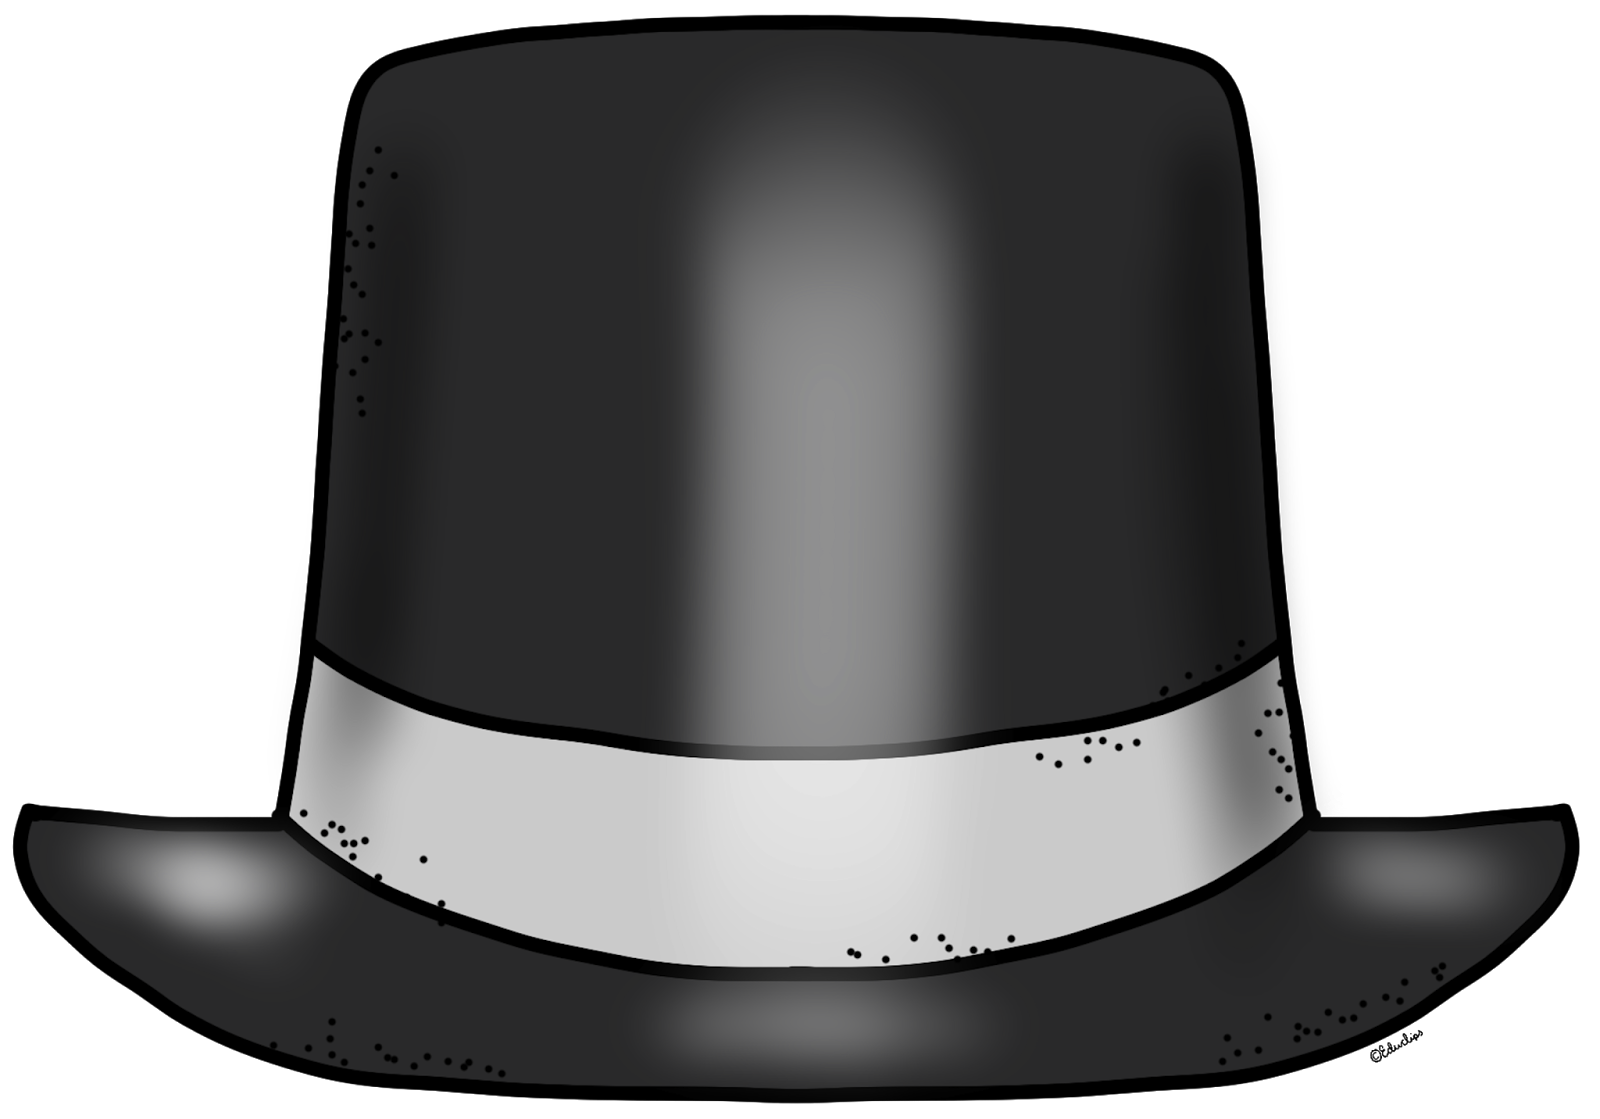 Top hat clipart black and white free clipart images image